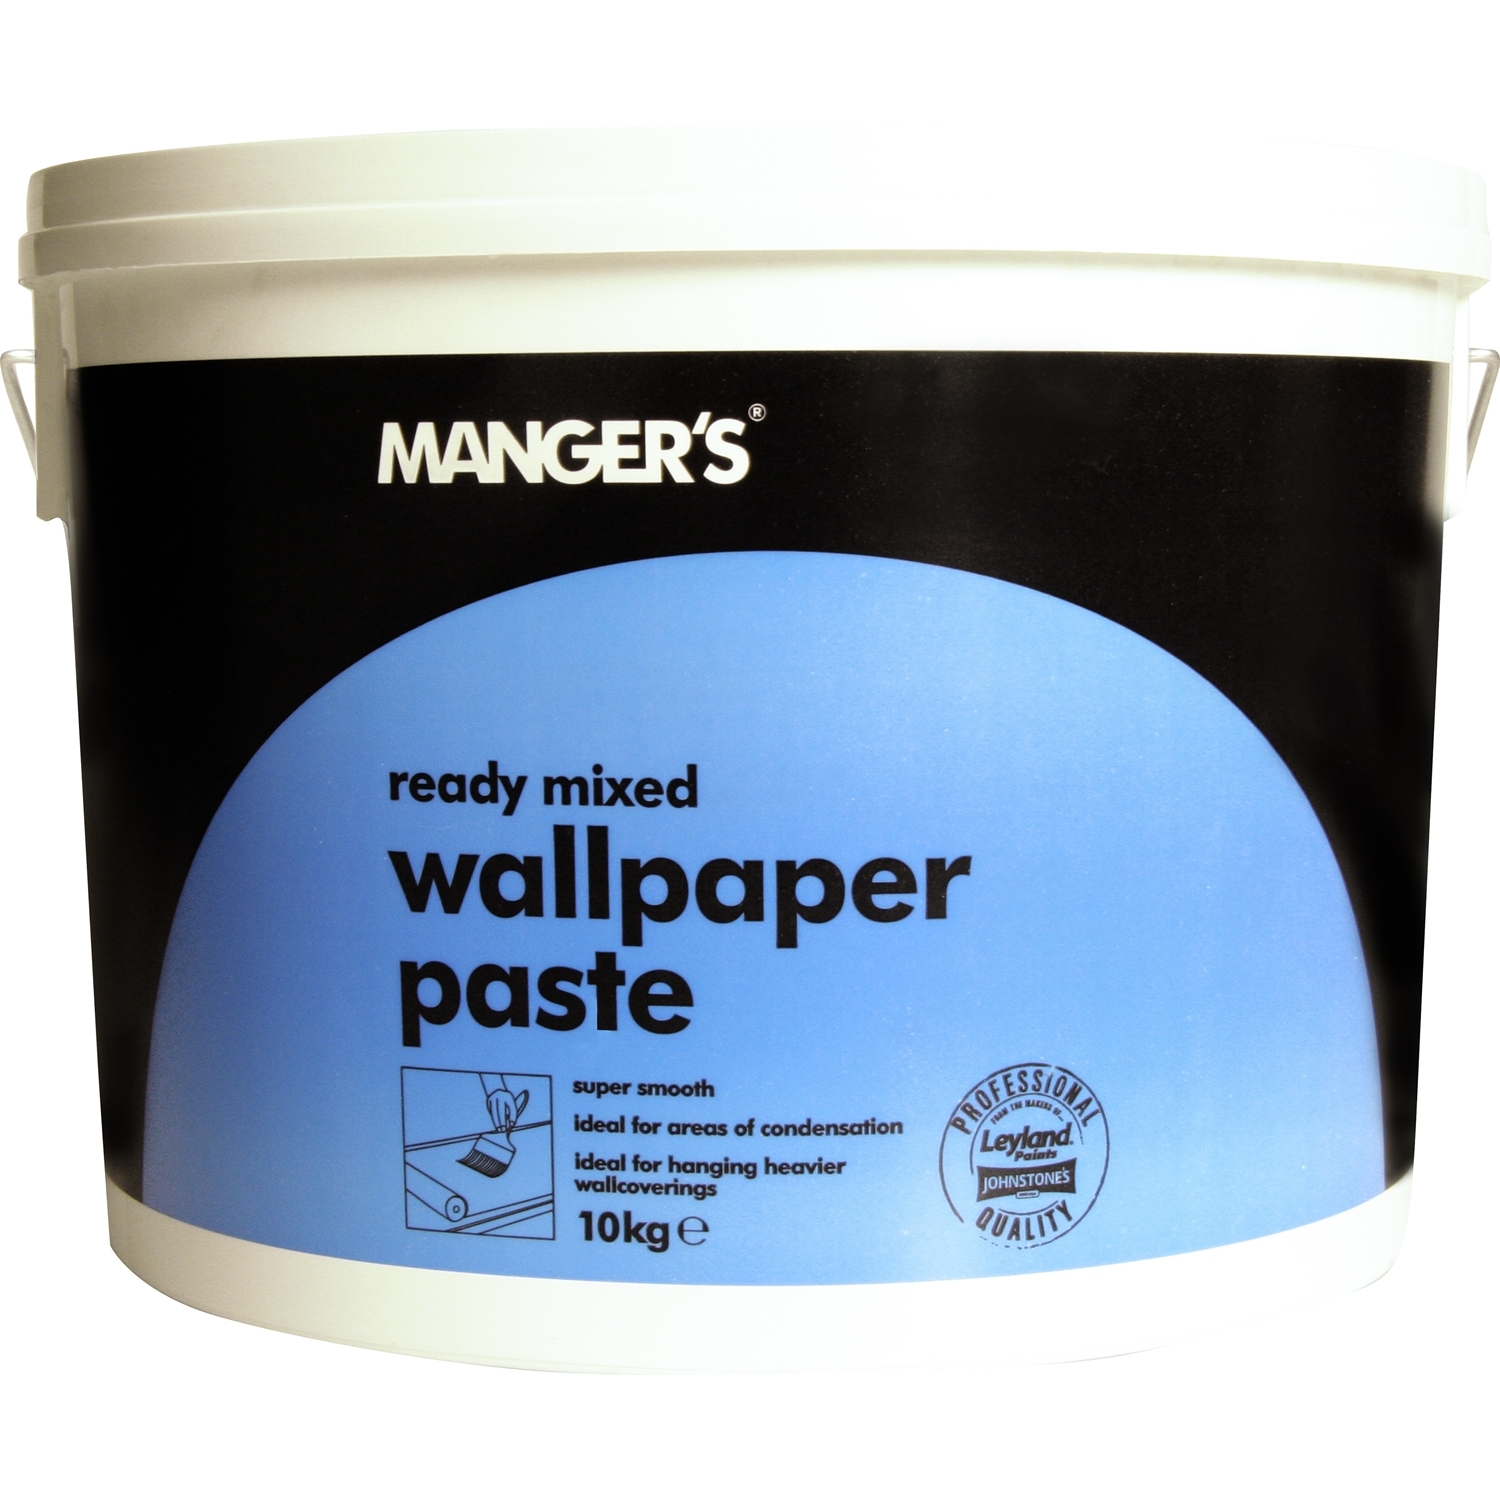 Ready Mixed Wallpaper Paste - 10kg Image